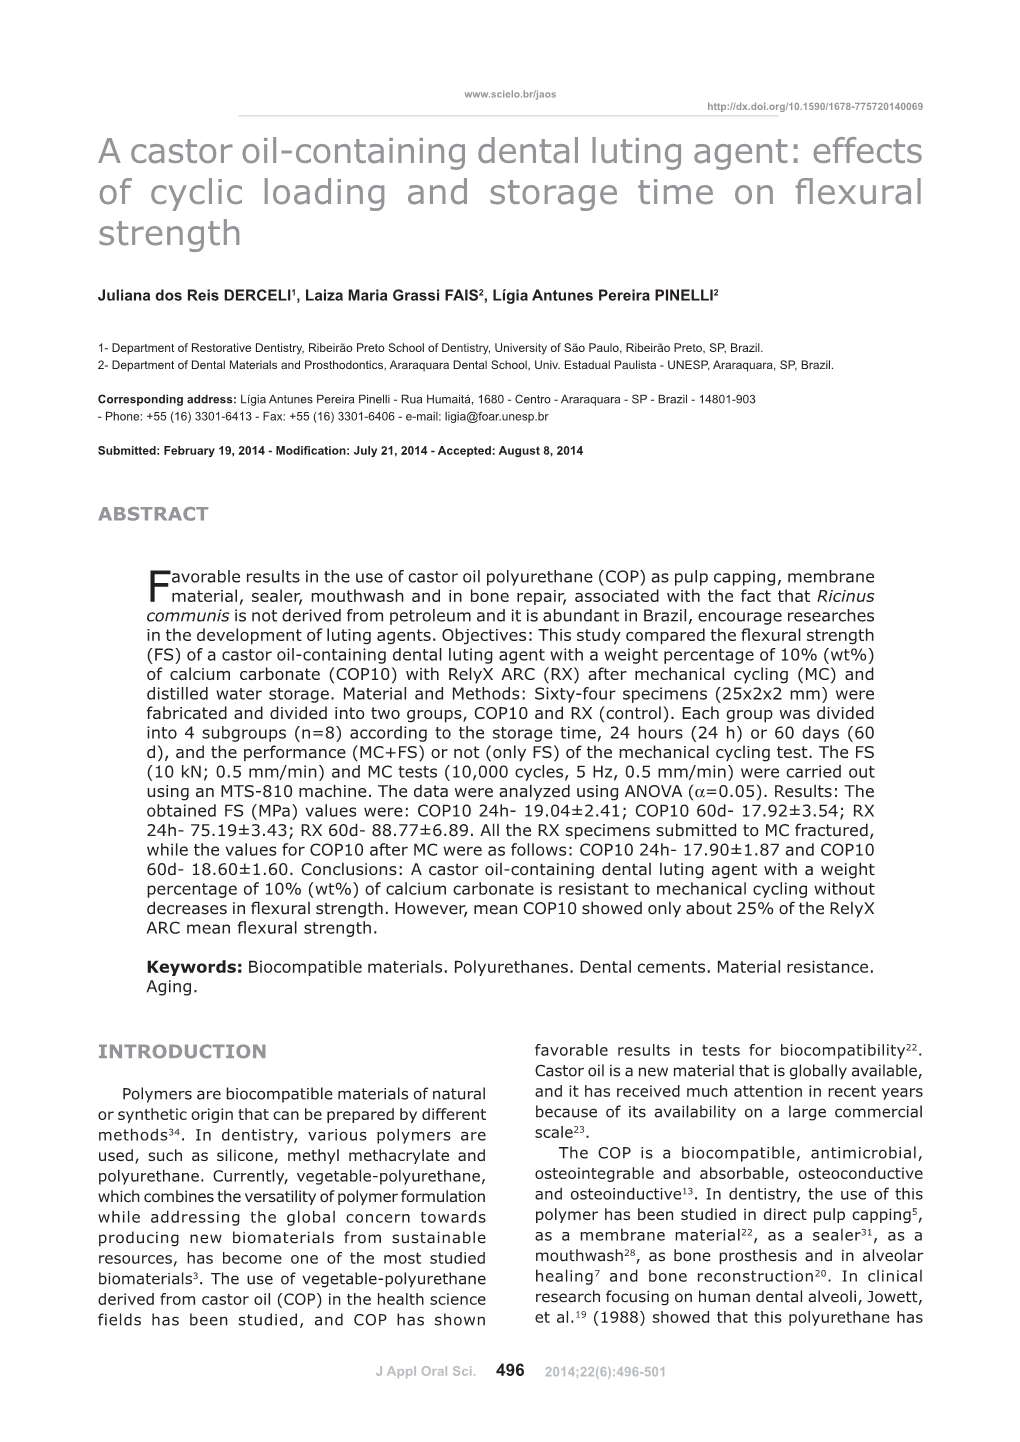 A Castor Oil-Containing Dental Luting Agent: Effects RIF\FOLFORDGLQJDQGVWRUDJHWLPHRQÀH[XUDO Strength